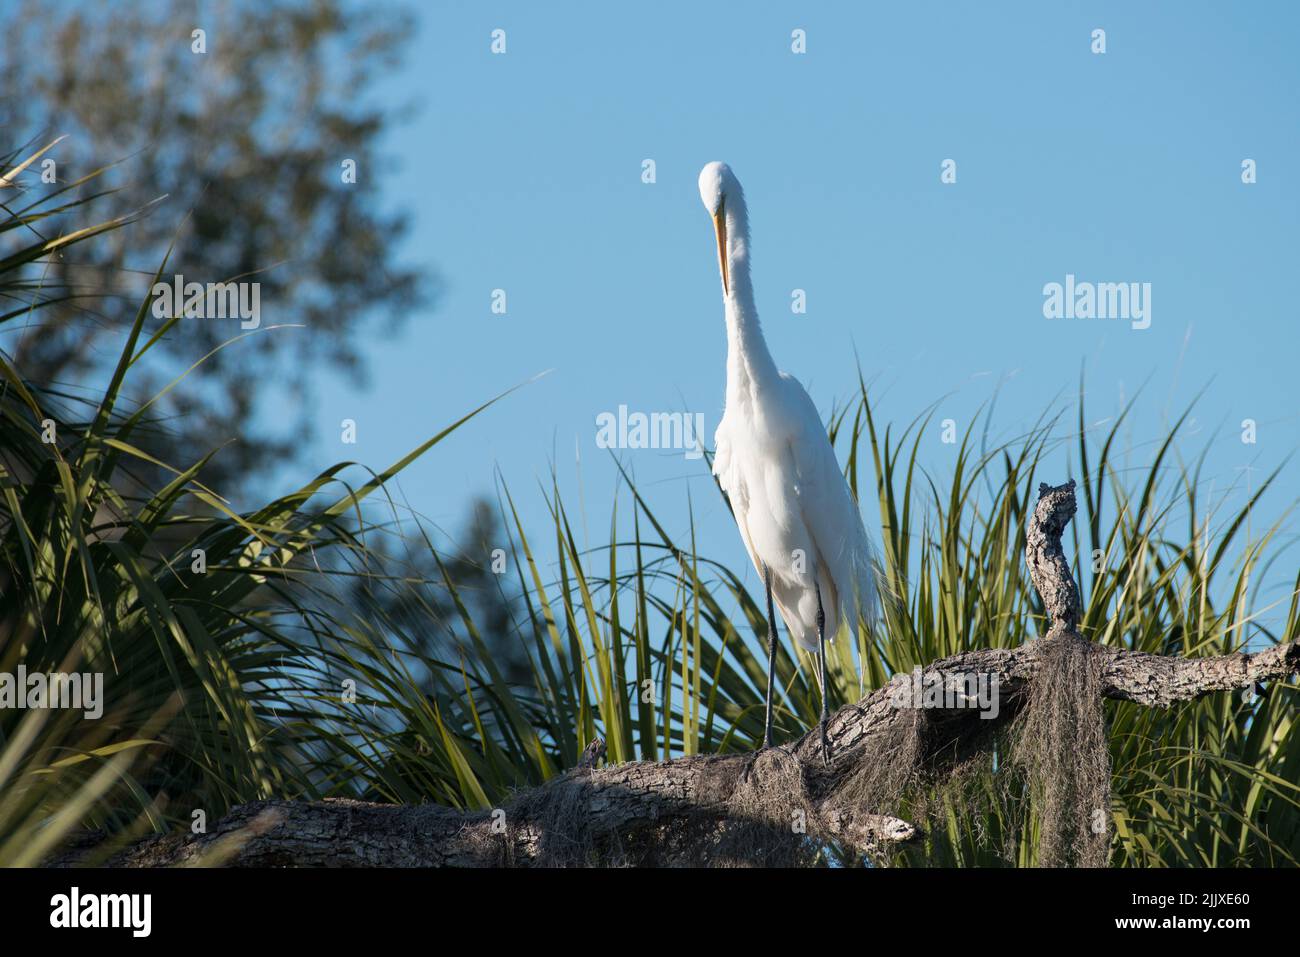 A Great Egret perches on a branch in the Tera Ceia Preserve State Park, Florida, USA Stock Photo